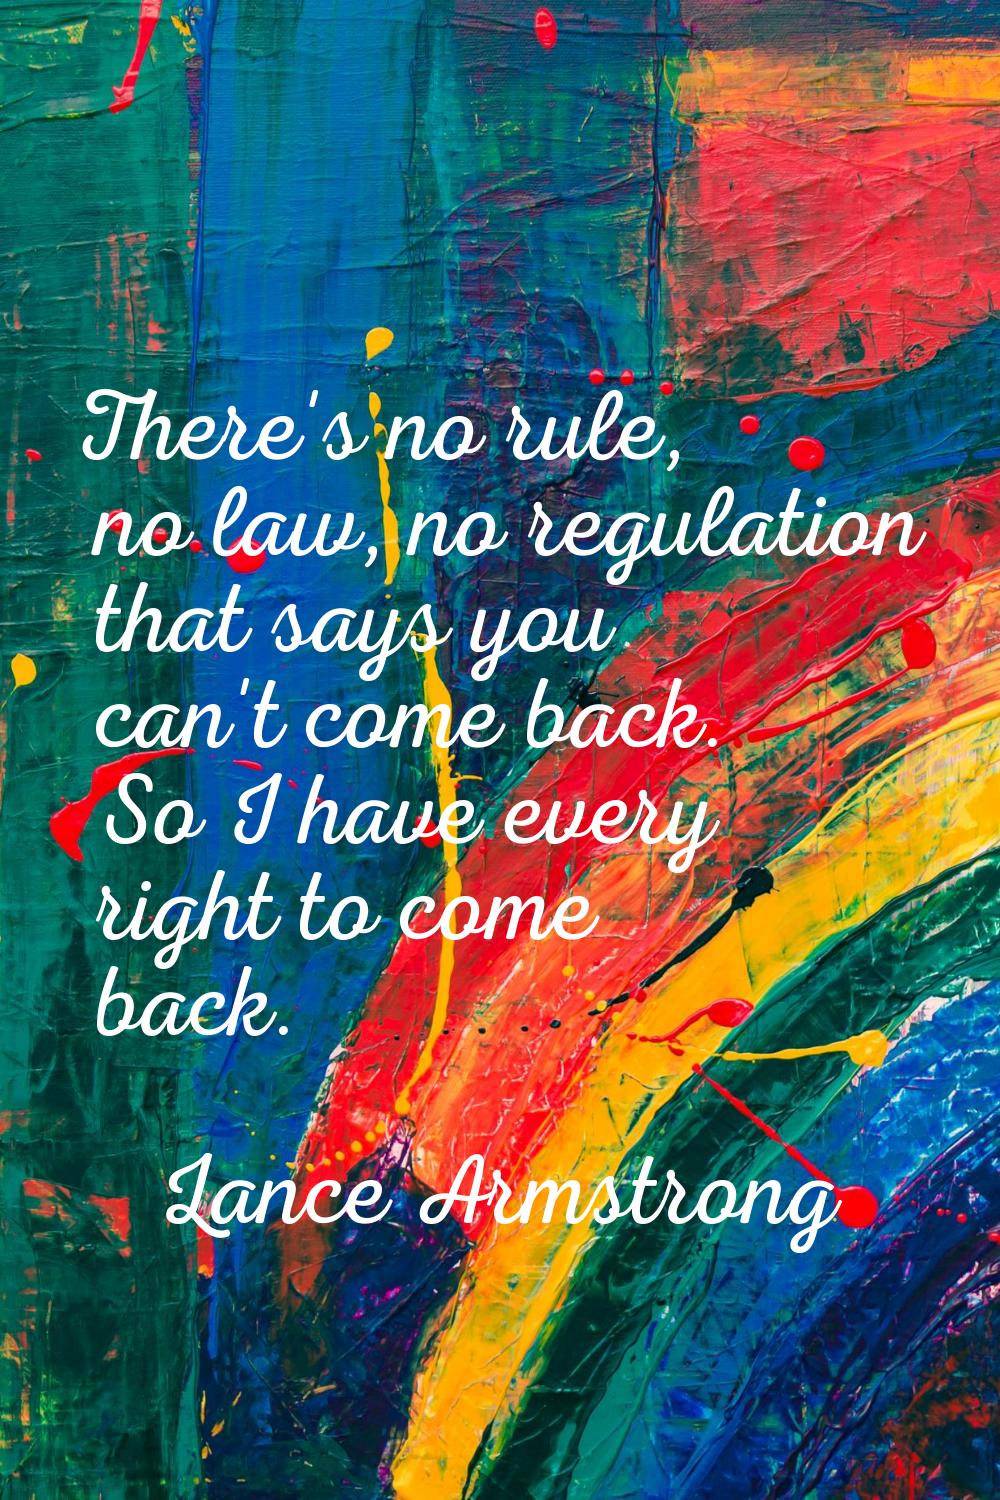 There's no rule, no law, no regulation that says you can't come back. So I have every right to come